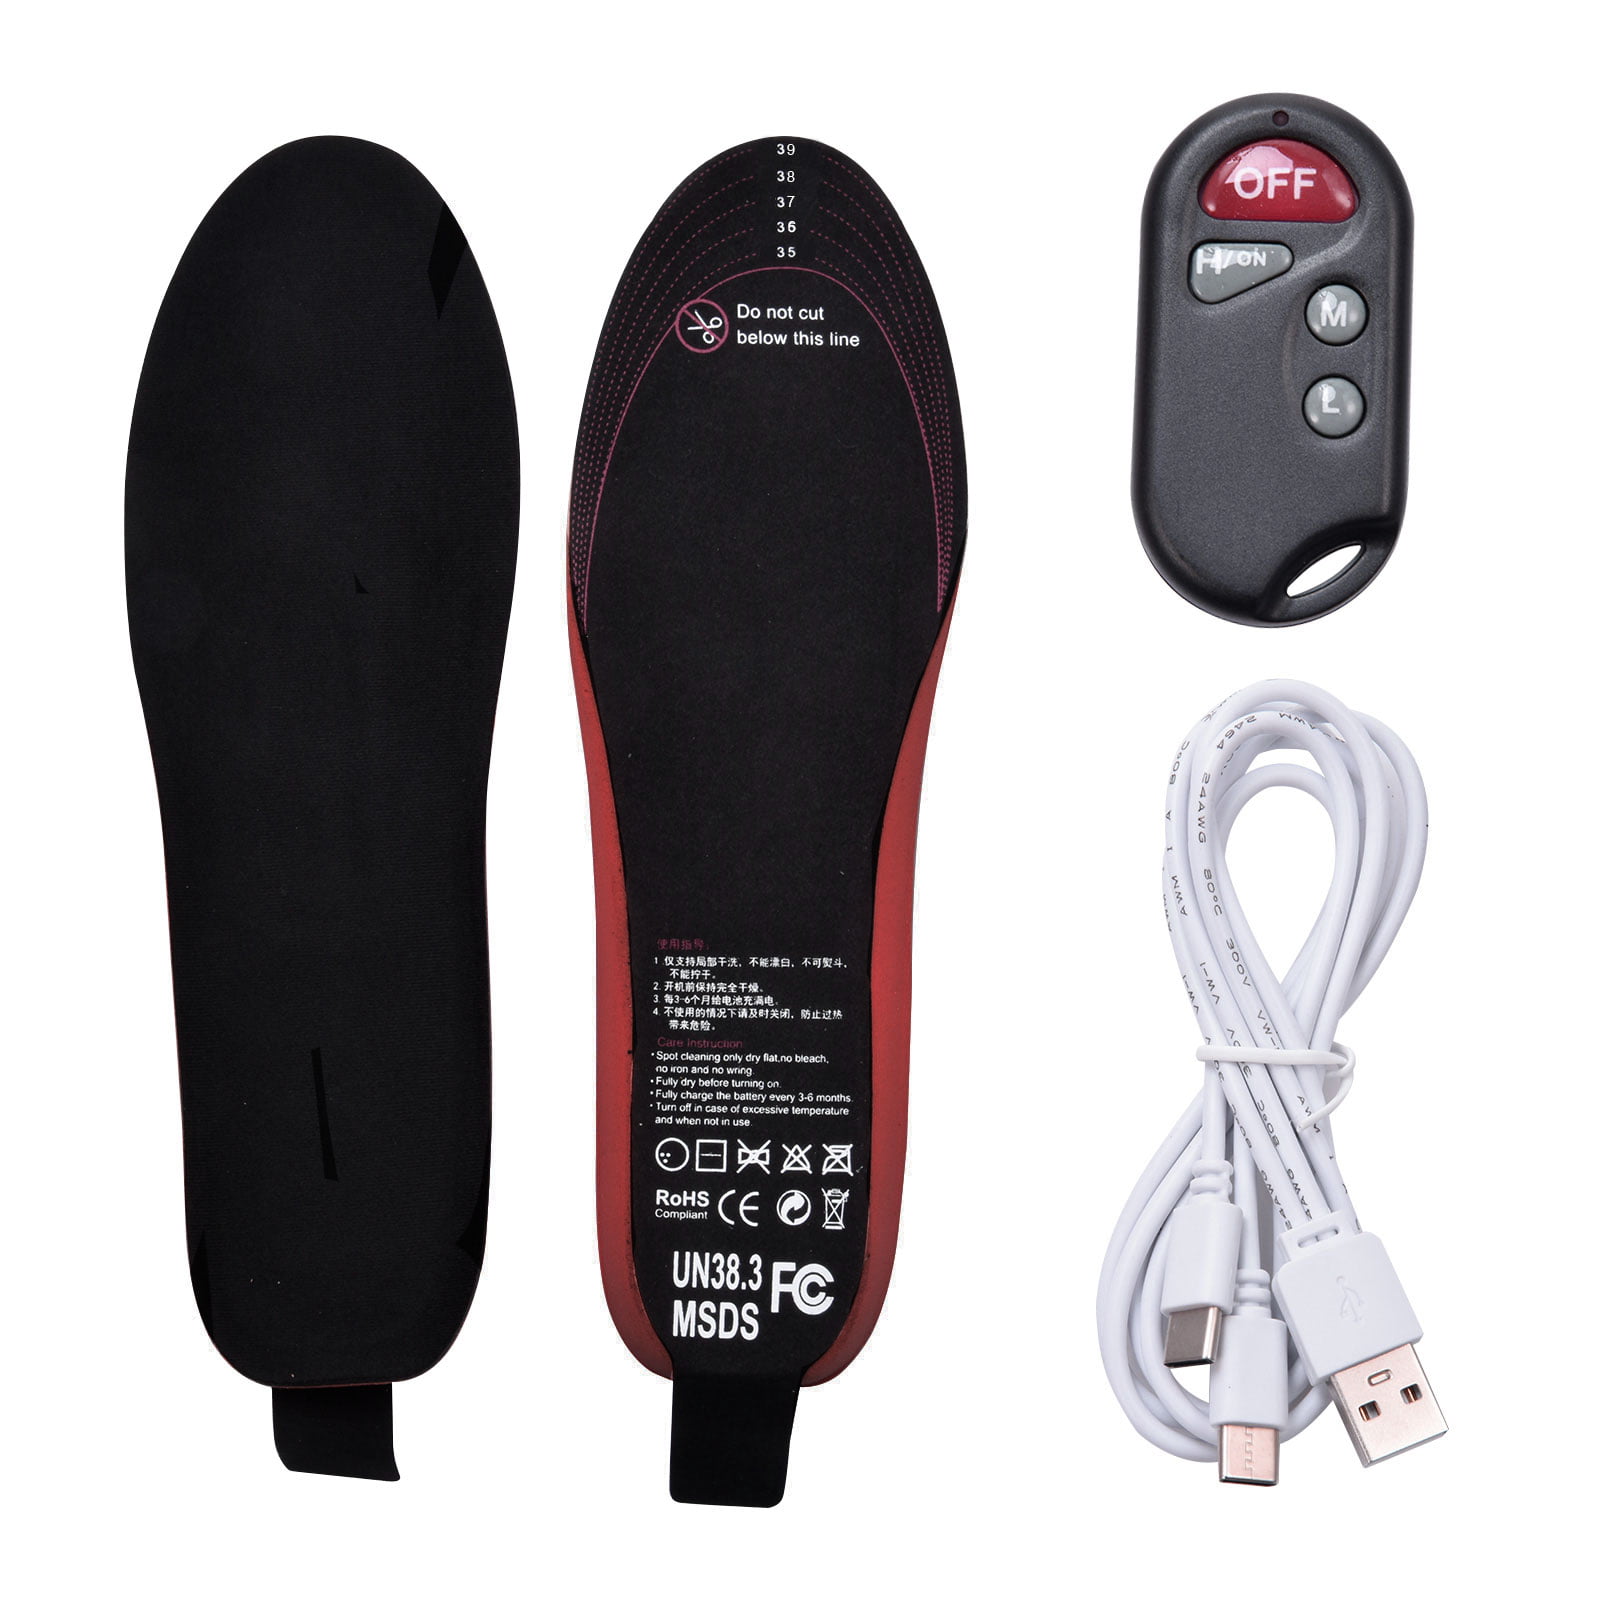 Details about   Electric Heated Insole Pad Winter Warm USB Rechargeable Foot Warmer With Remote 